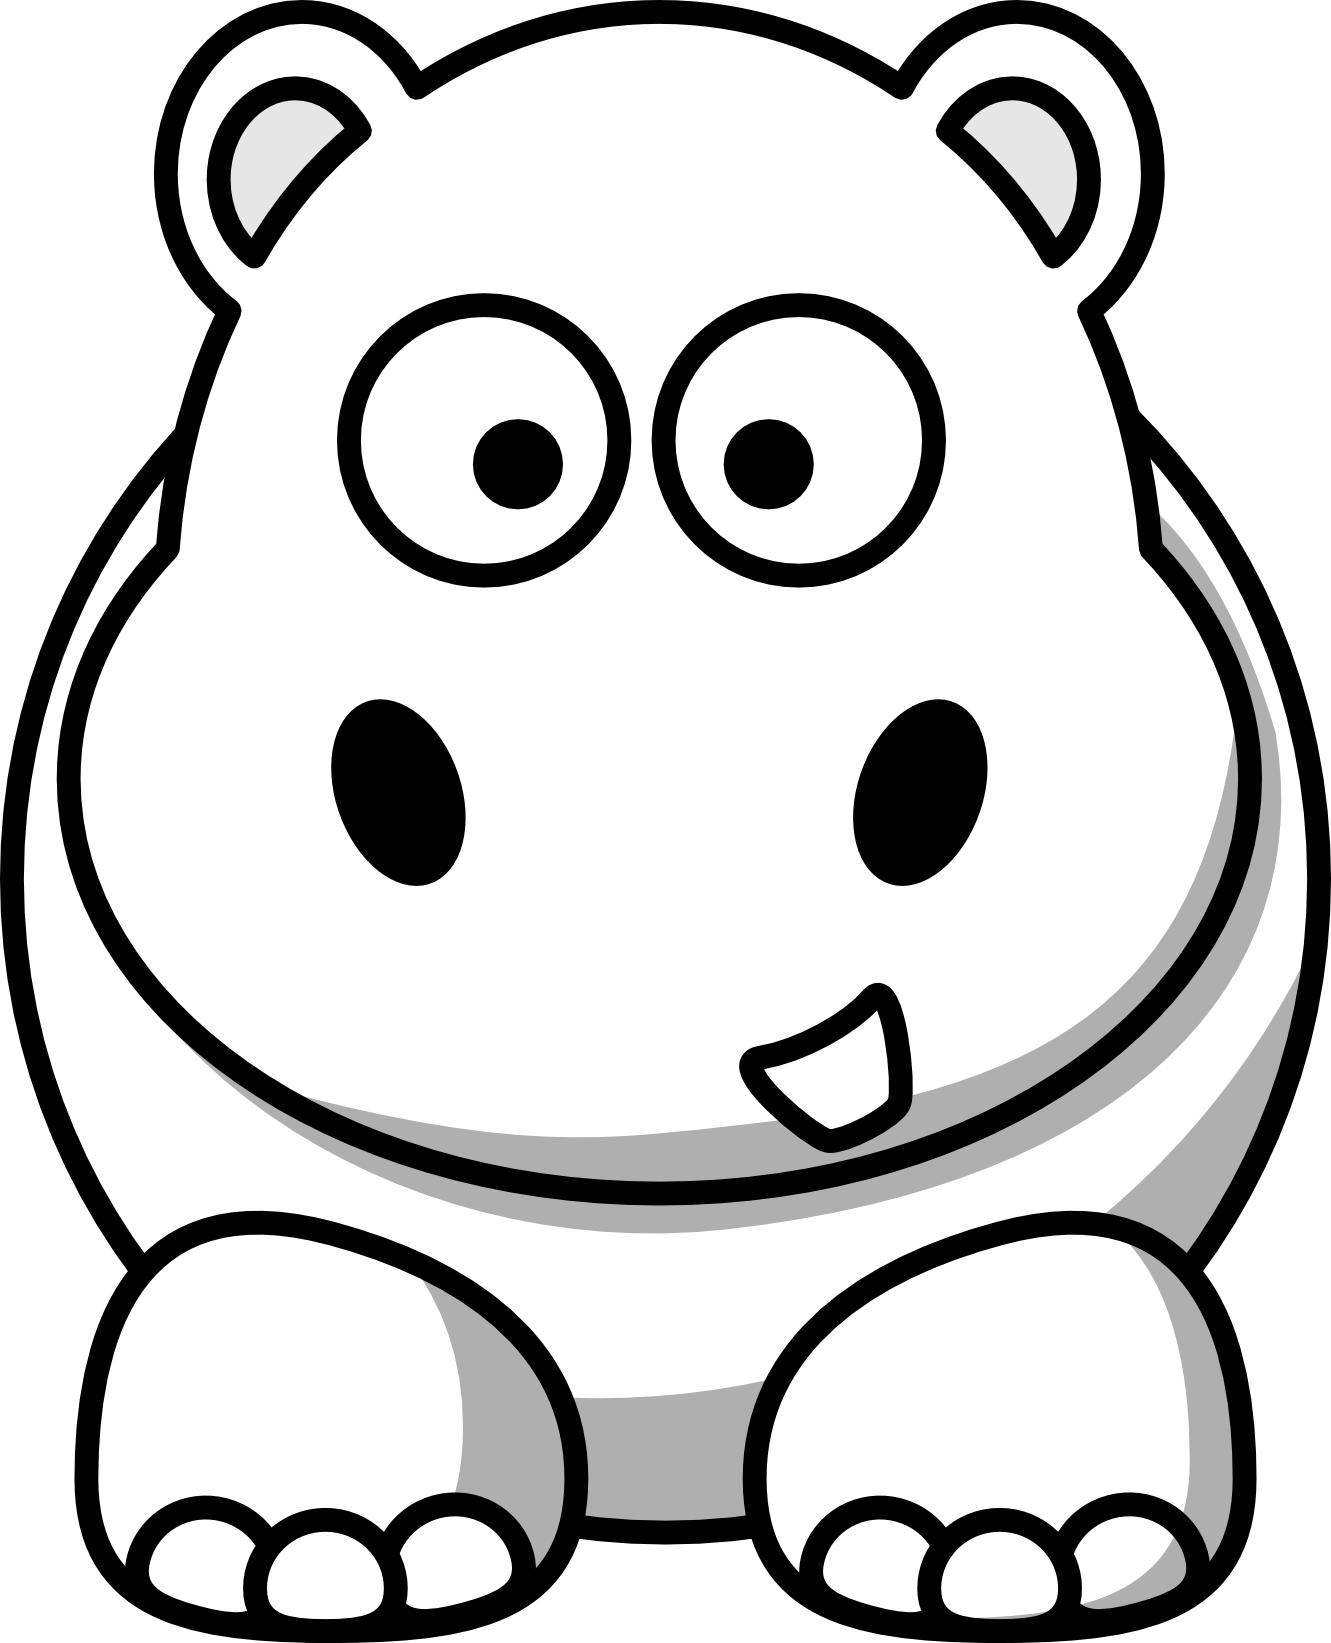 Hippo clip art black and white free clipart images 4